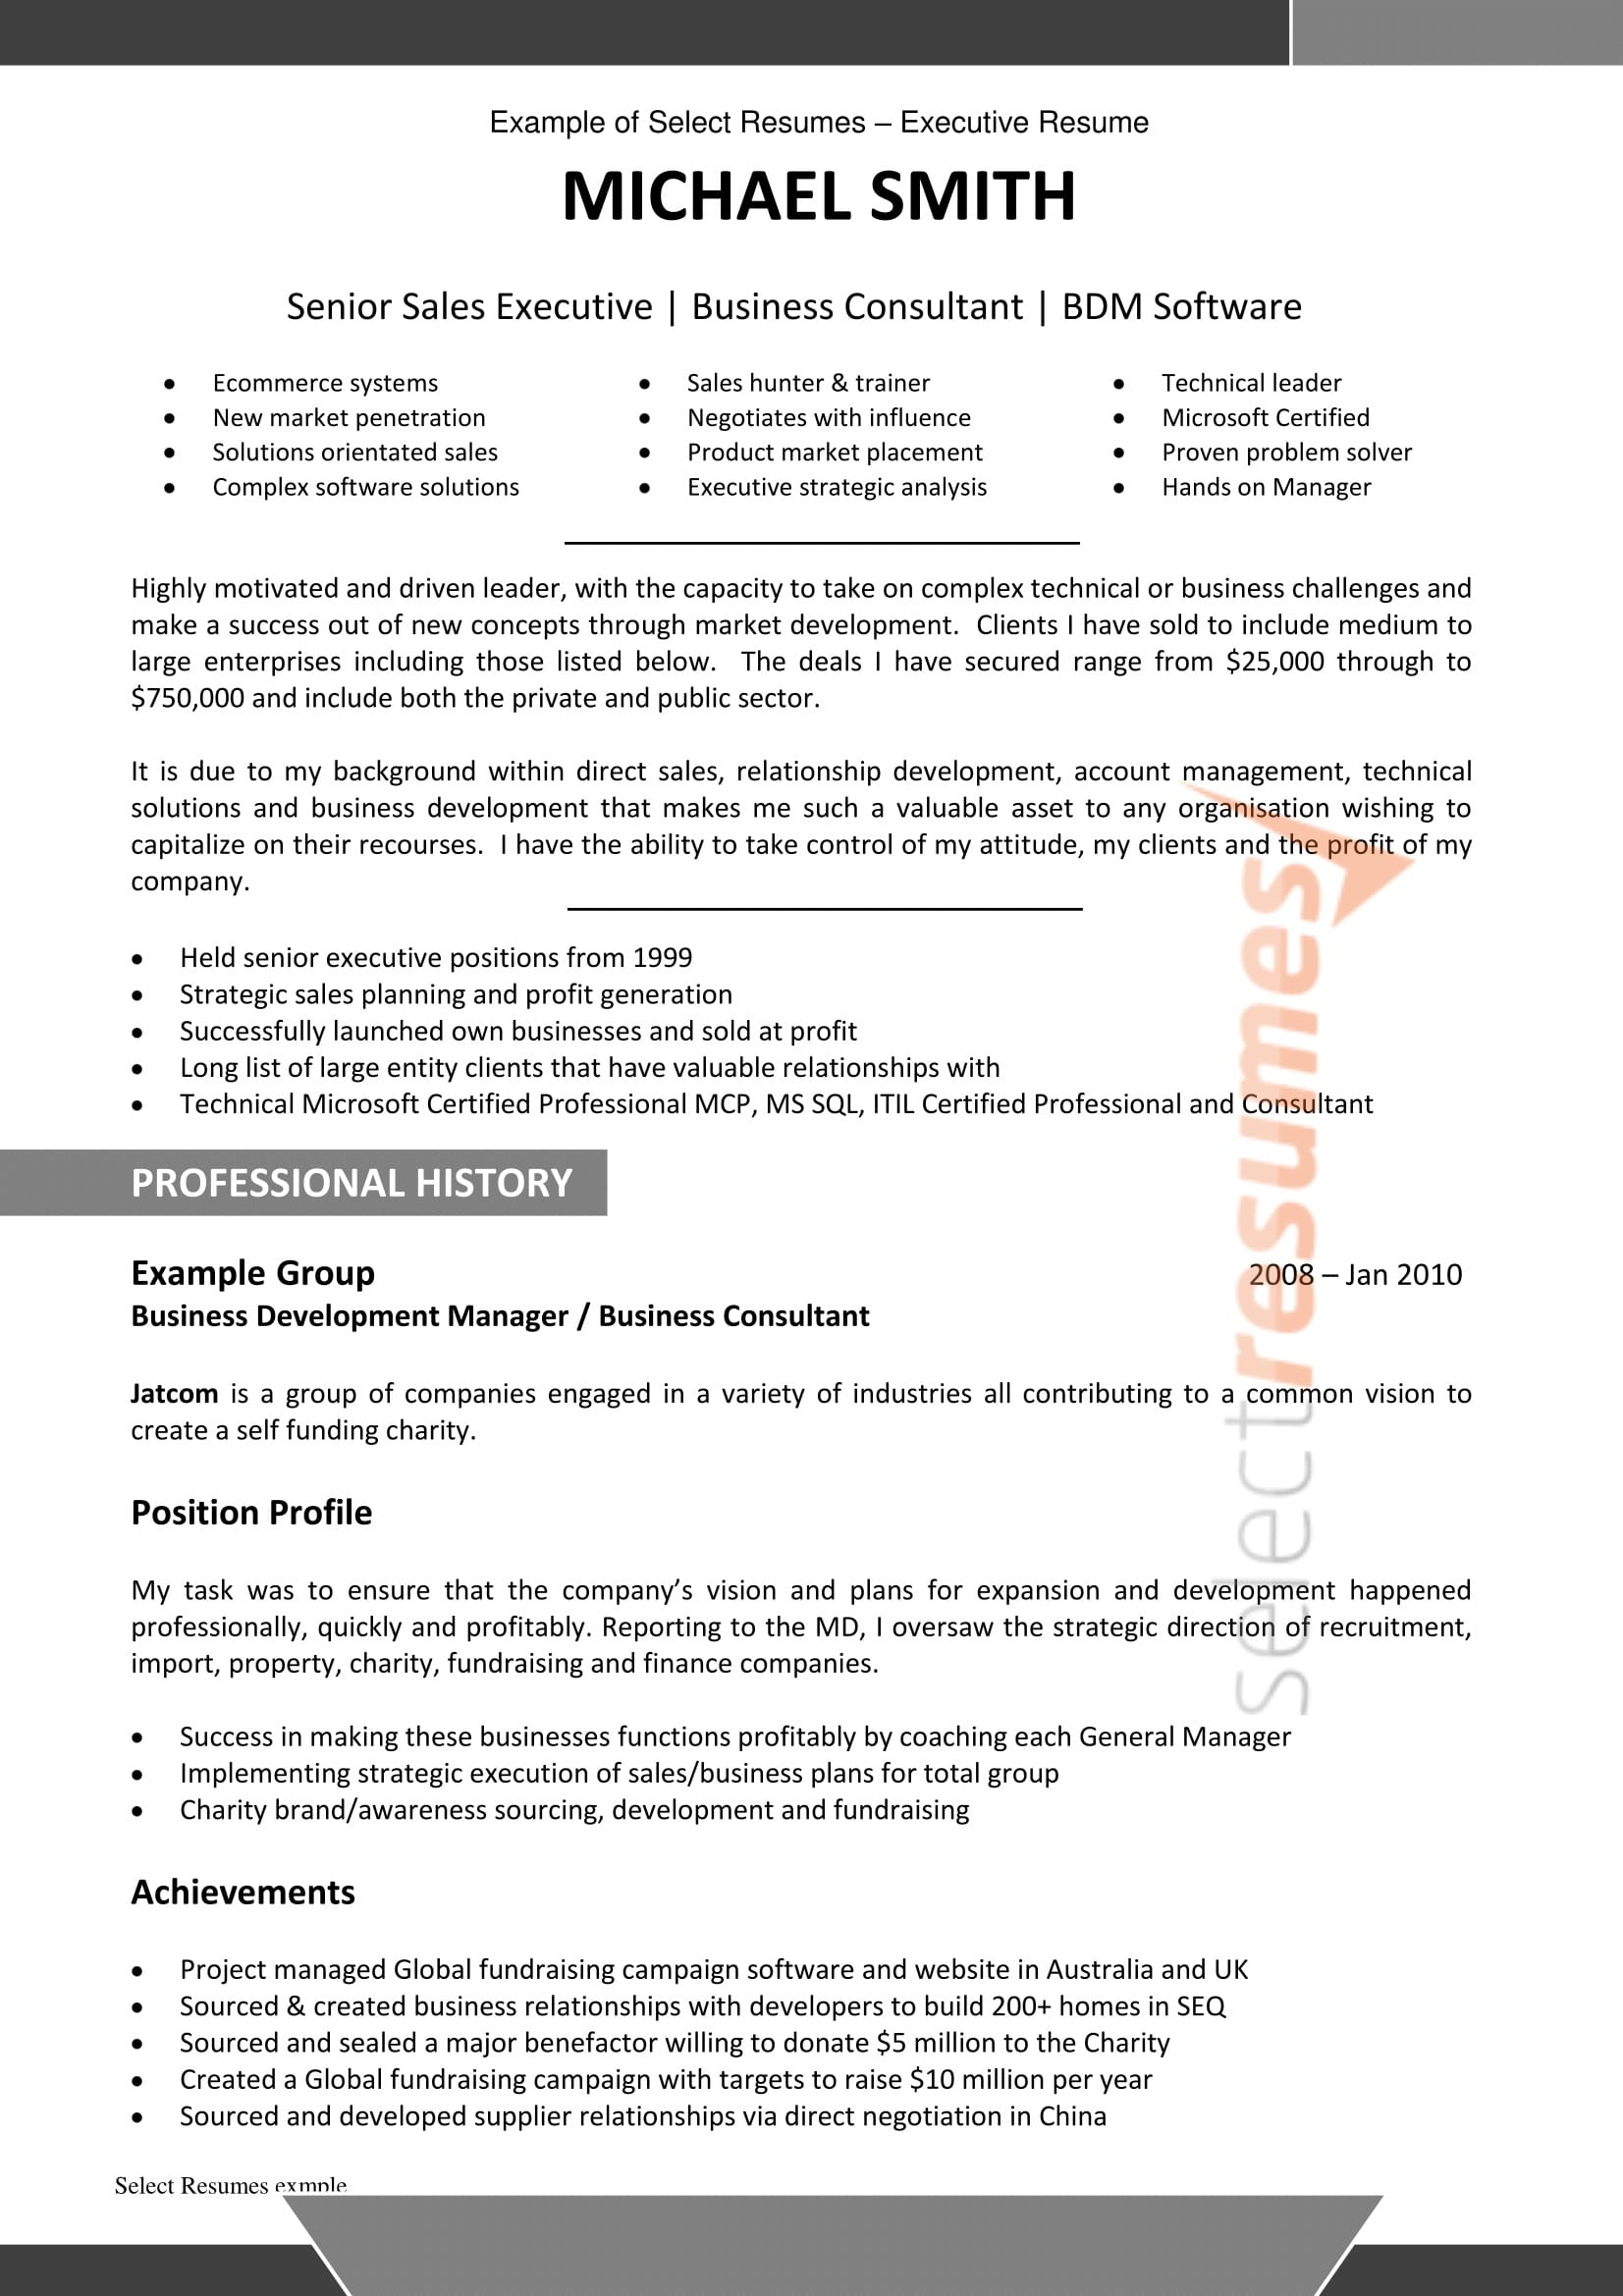 Professional Resume Services Professional Resume Writers inside size 1653 X 2339